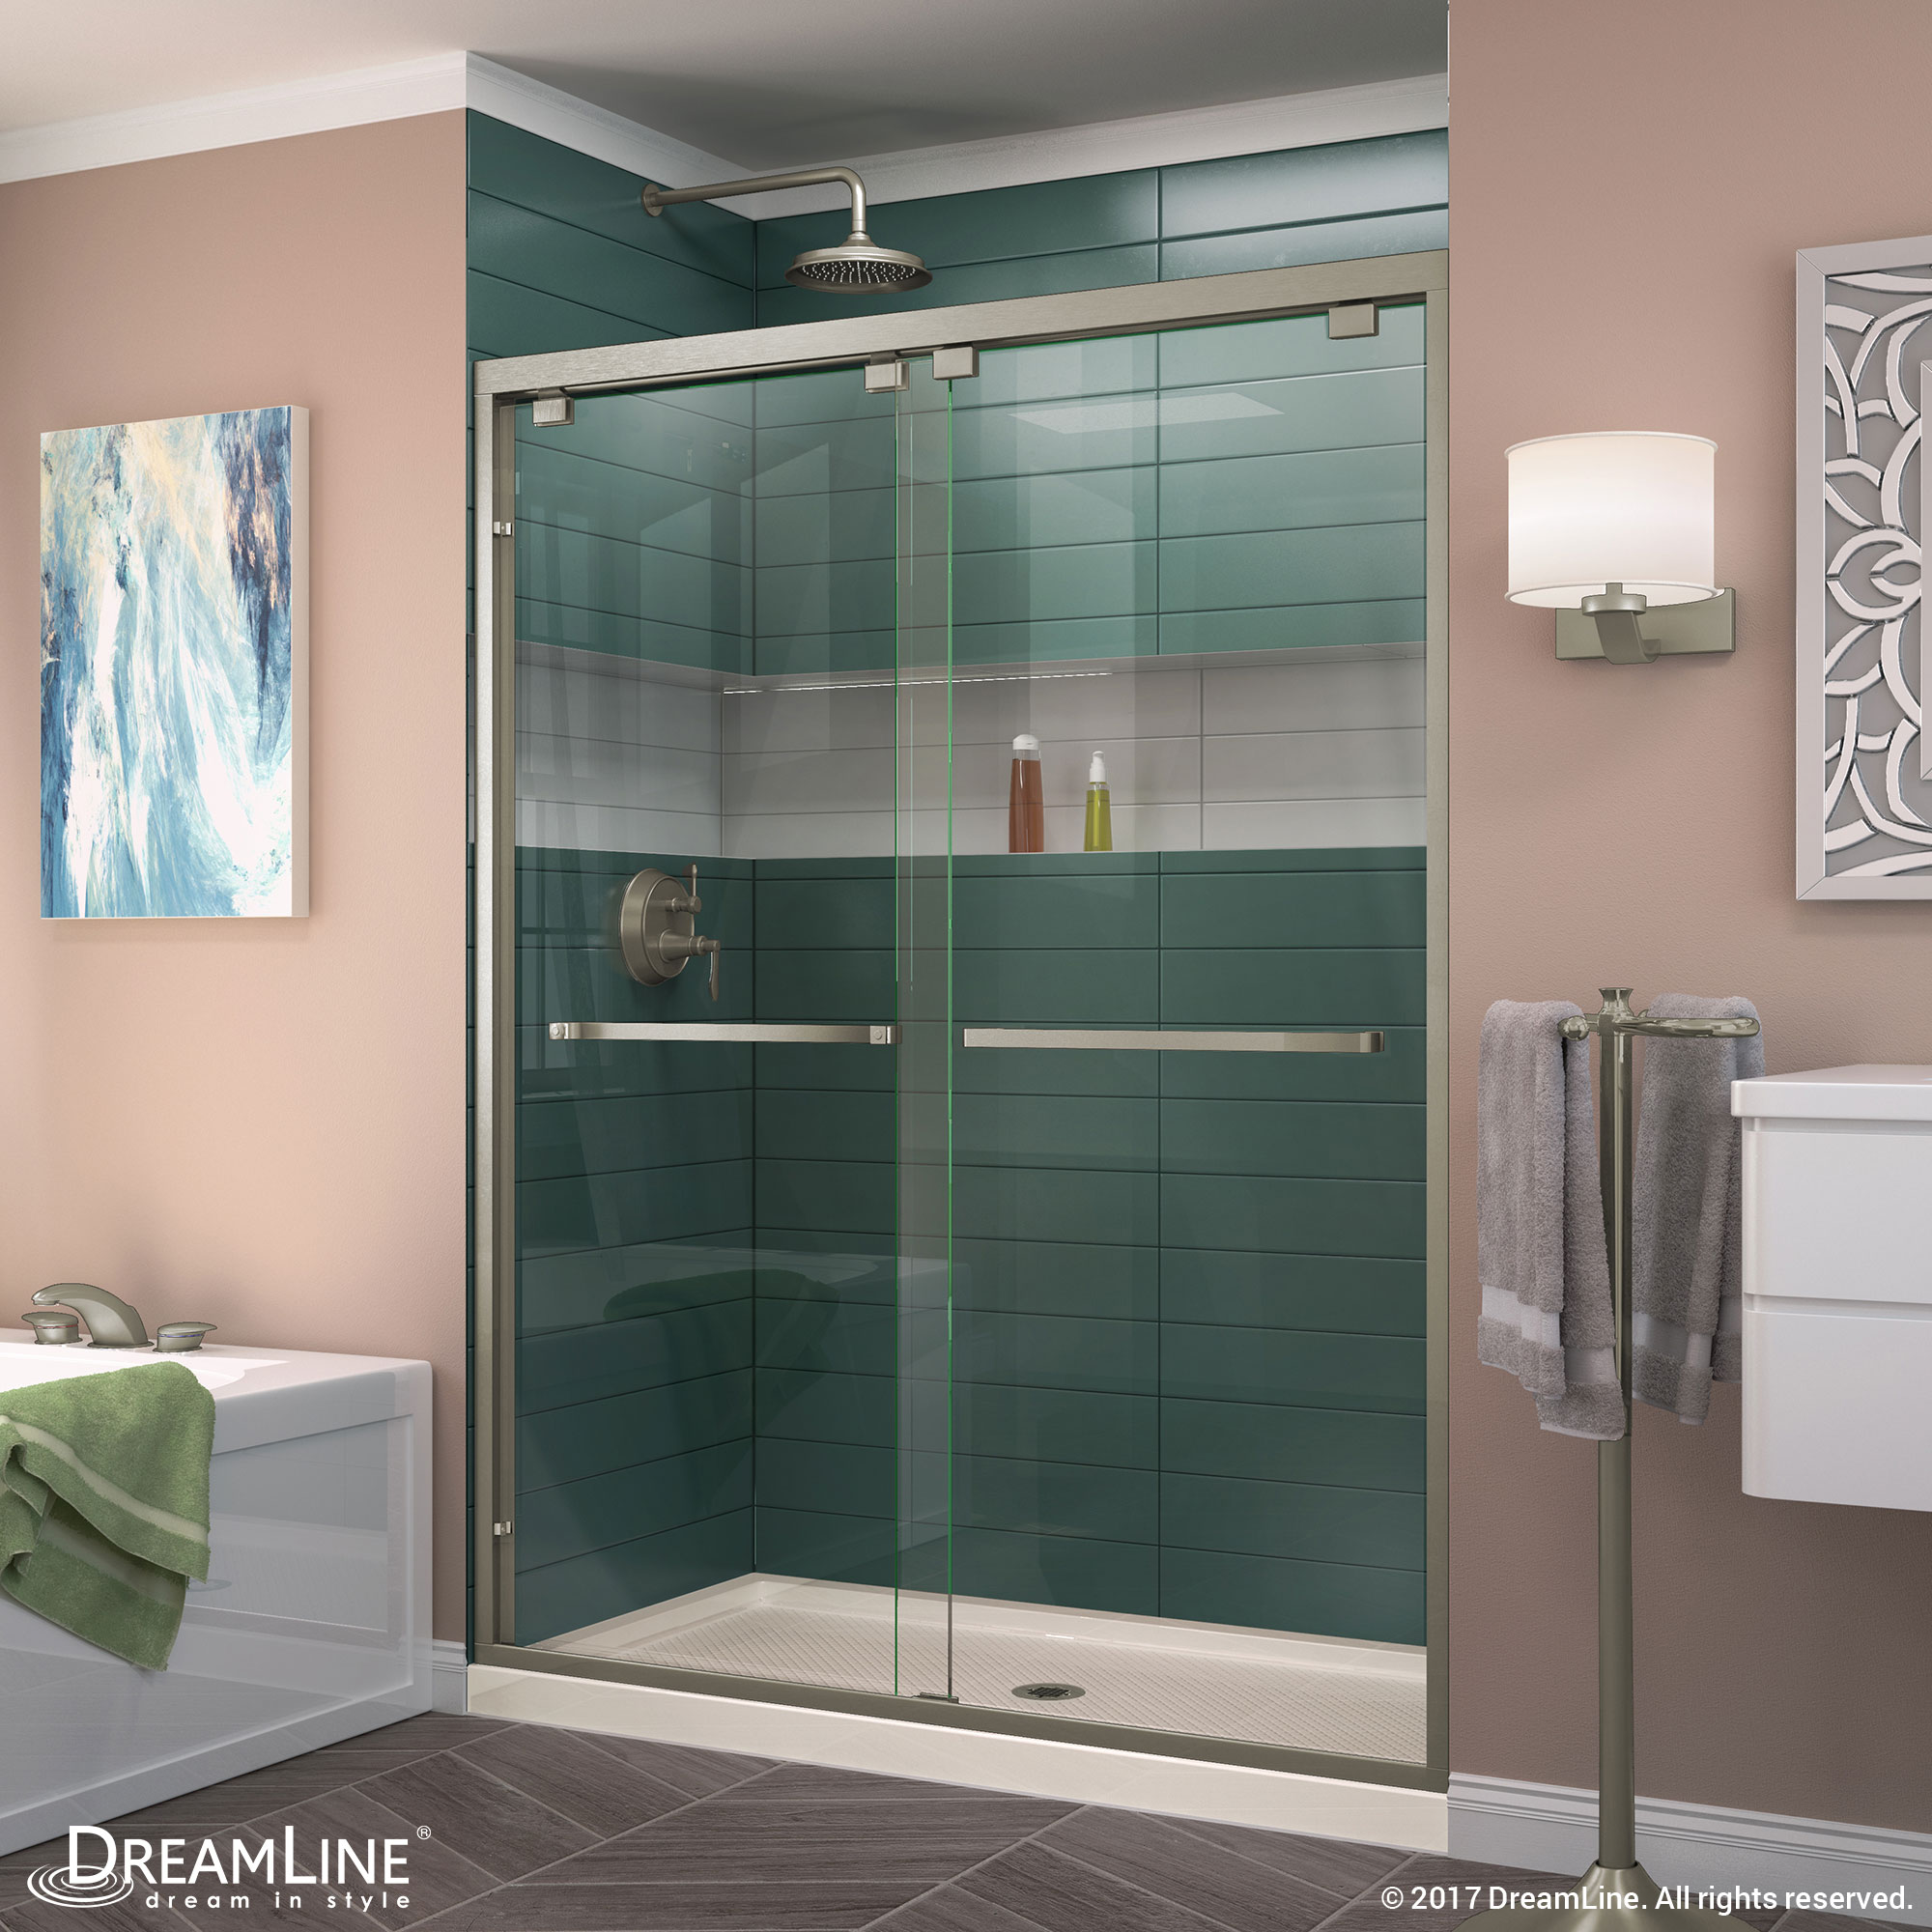 DreamLine Encore 34 in. D x 60 in. W x 78 3/4 in. H Bypass Shower Door in Chrome and Left Drain Black Base Kit